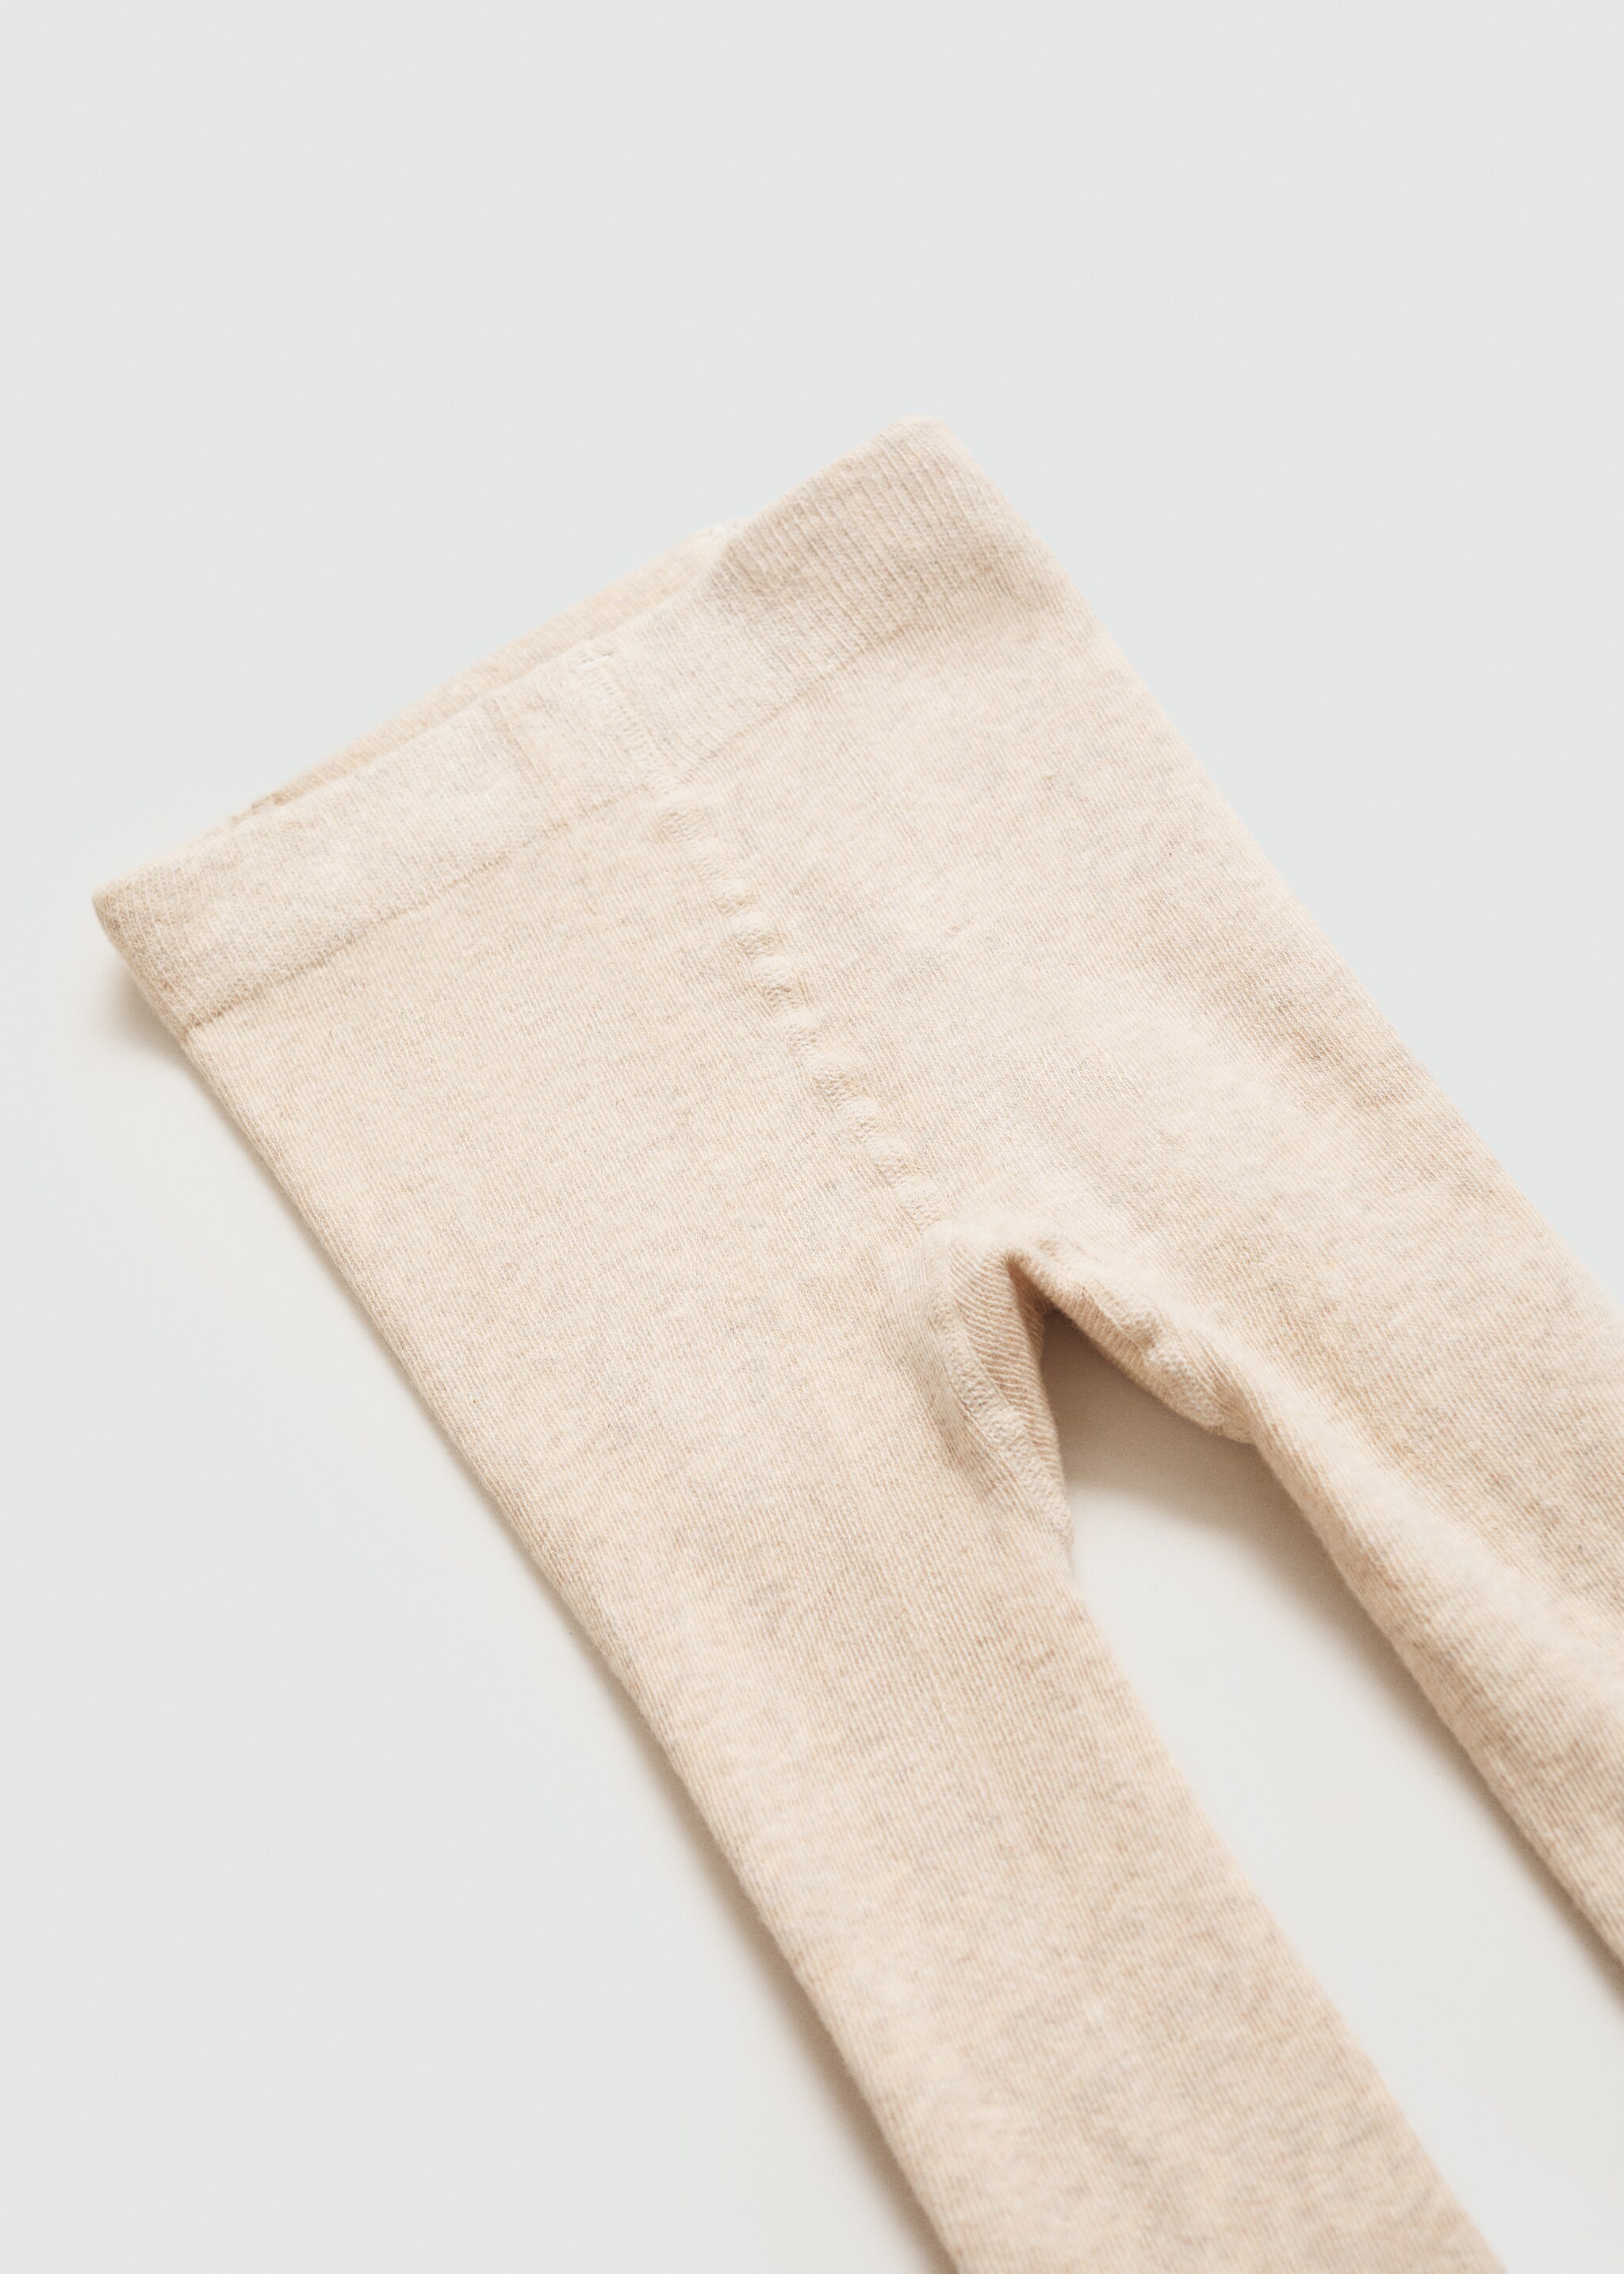 Cotton stockings - Details of the article 0